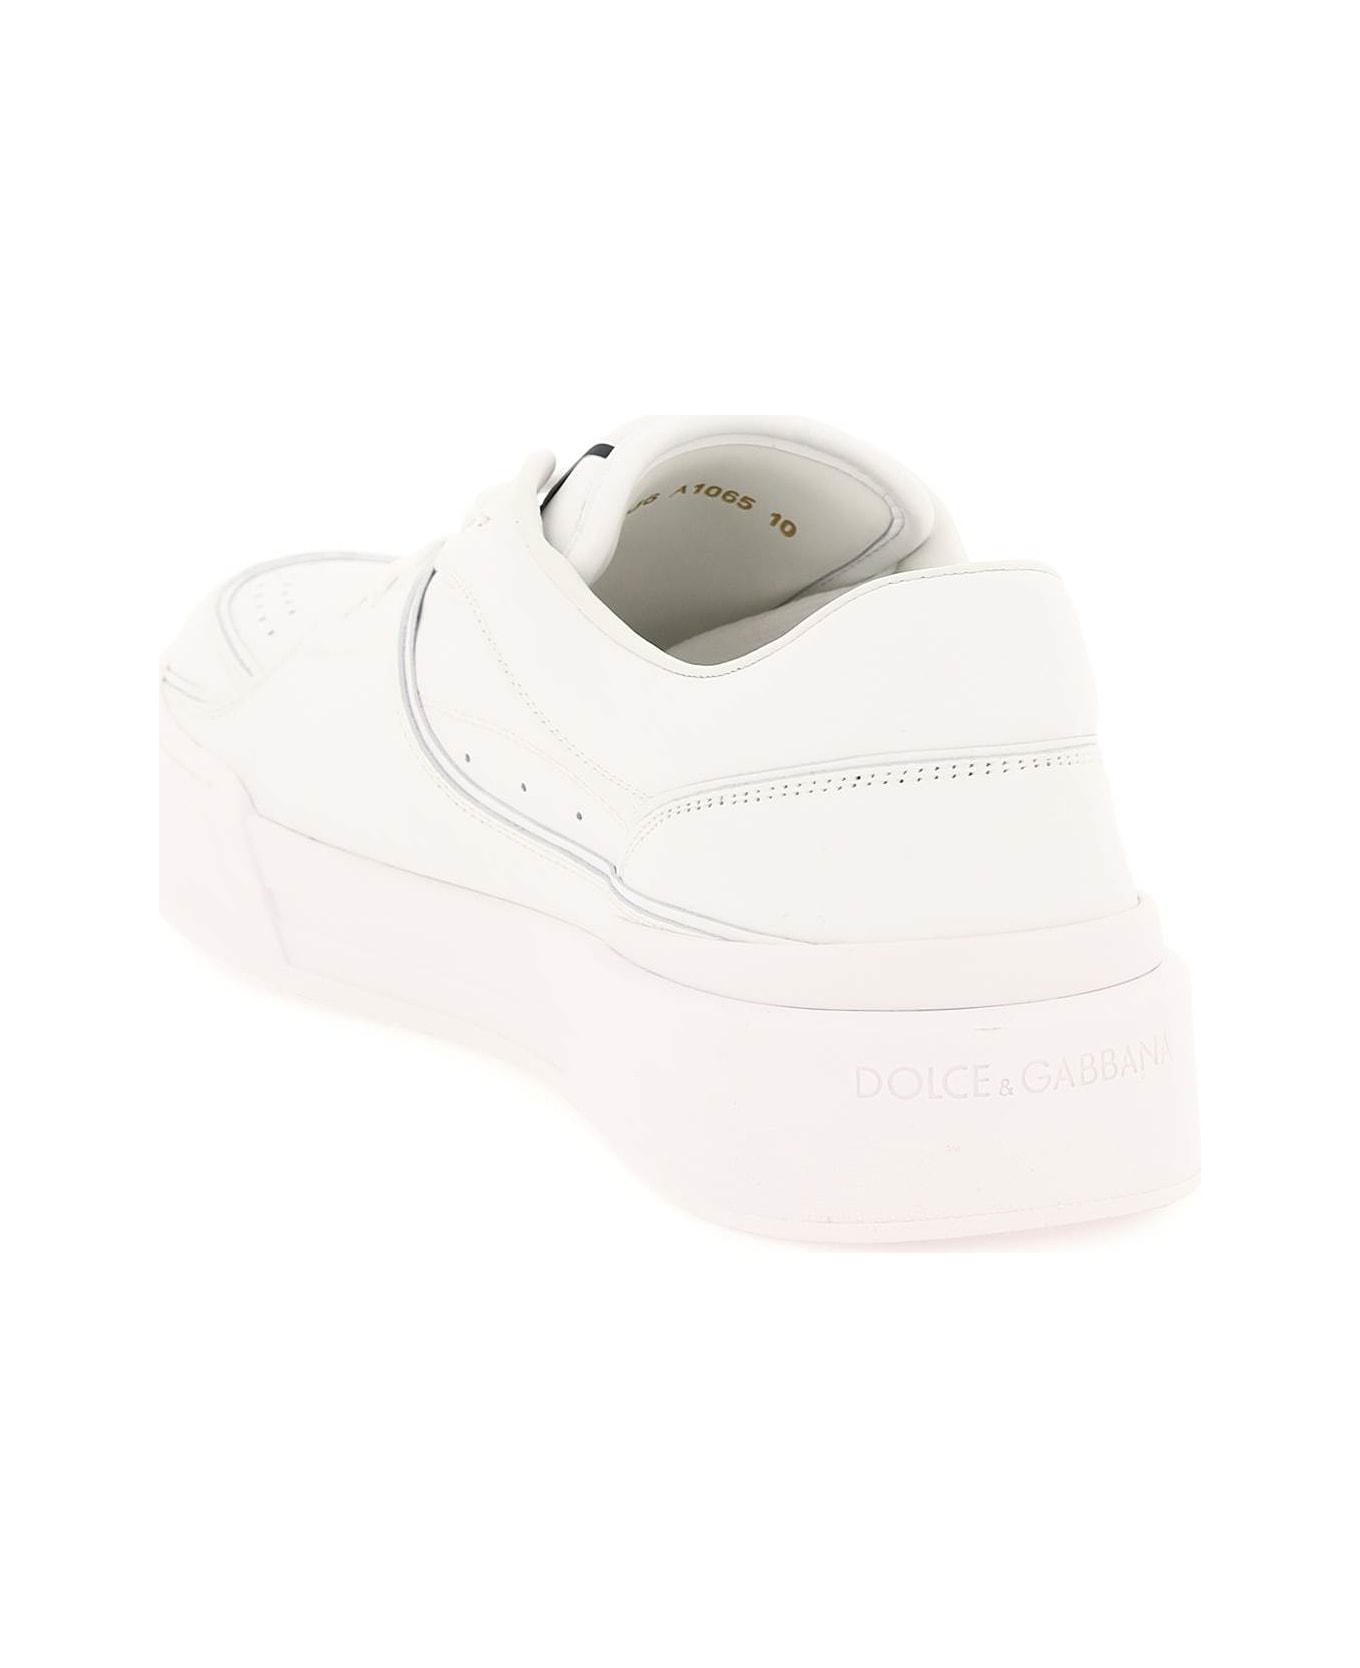 Dolce & Gabbana New Roma Leather Sneakers - Bianco スニーカー